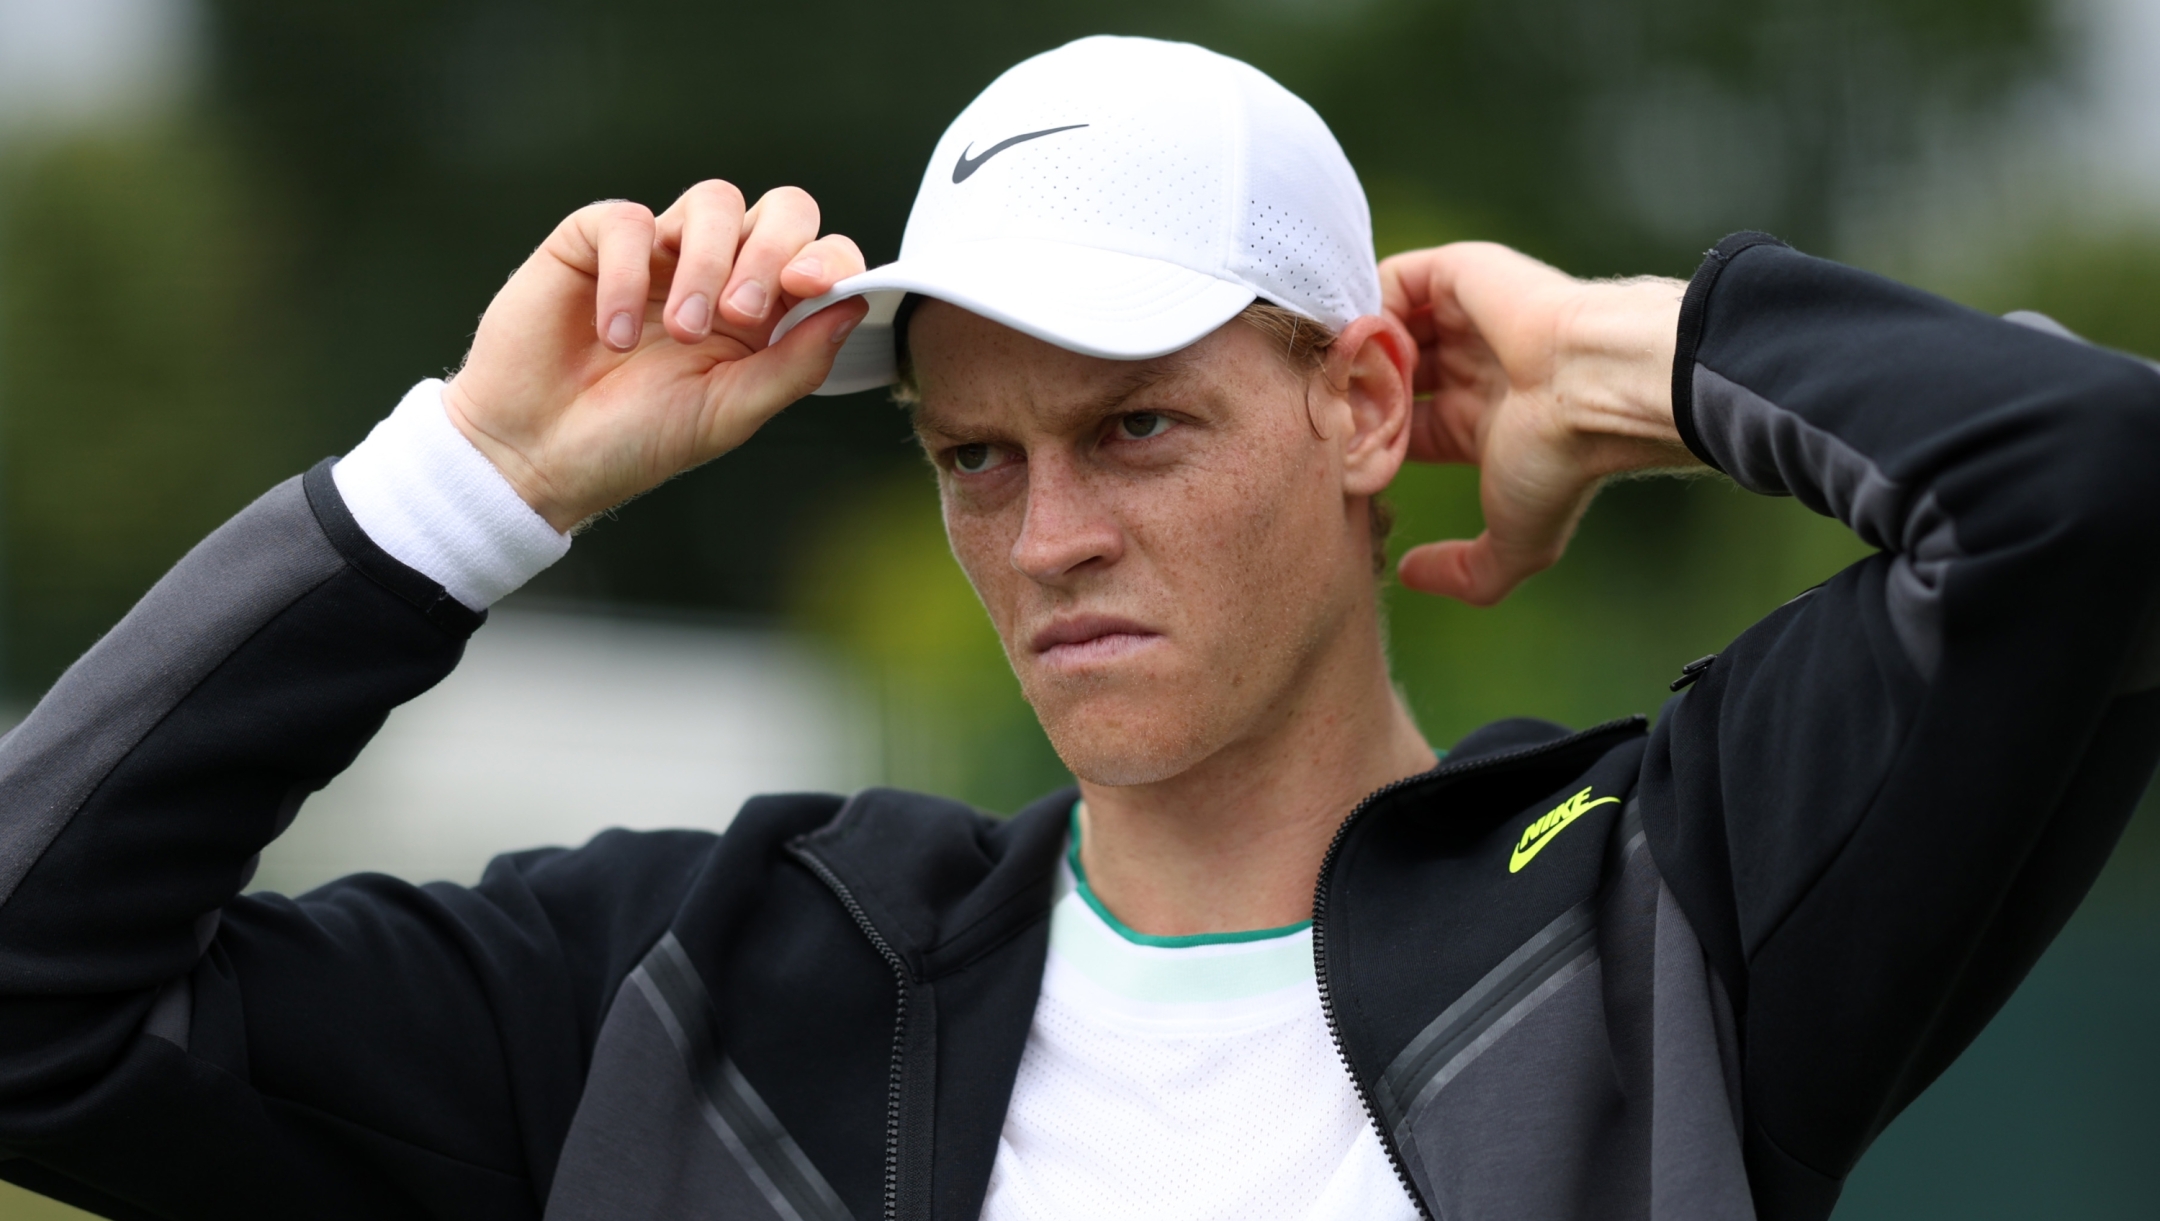 LONDON, ENGLAND - JUNE 28: Jannik Sinner of Italy adjusts his cap following practice prior to The Championships Wimbledon 2024 at All England Lawn Tennis and Croquet Club on June 28, 2024 in London, England. (Photo by Clive Brunskill/Getty Images)